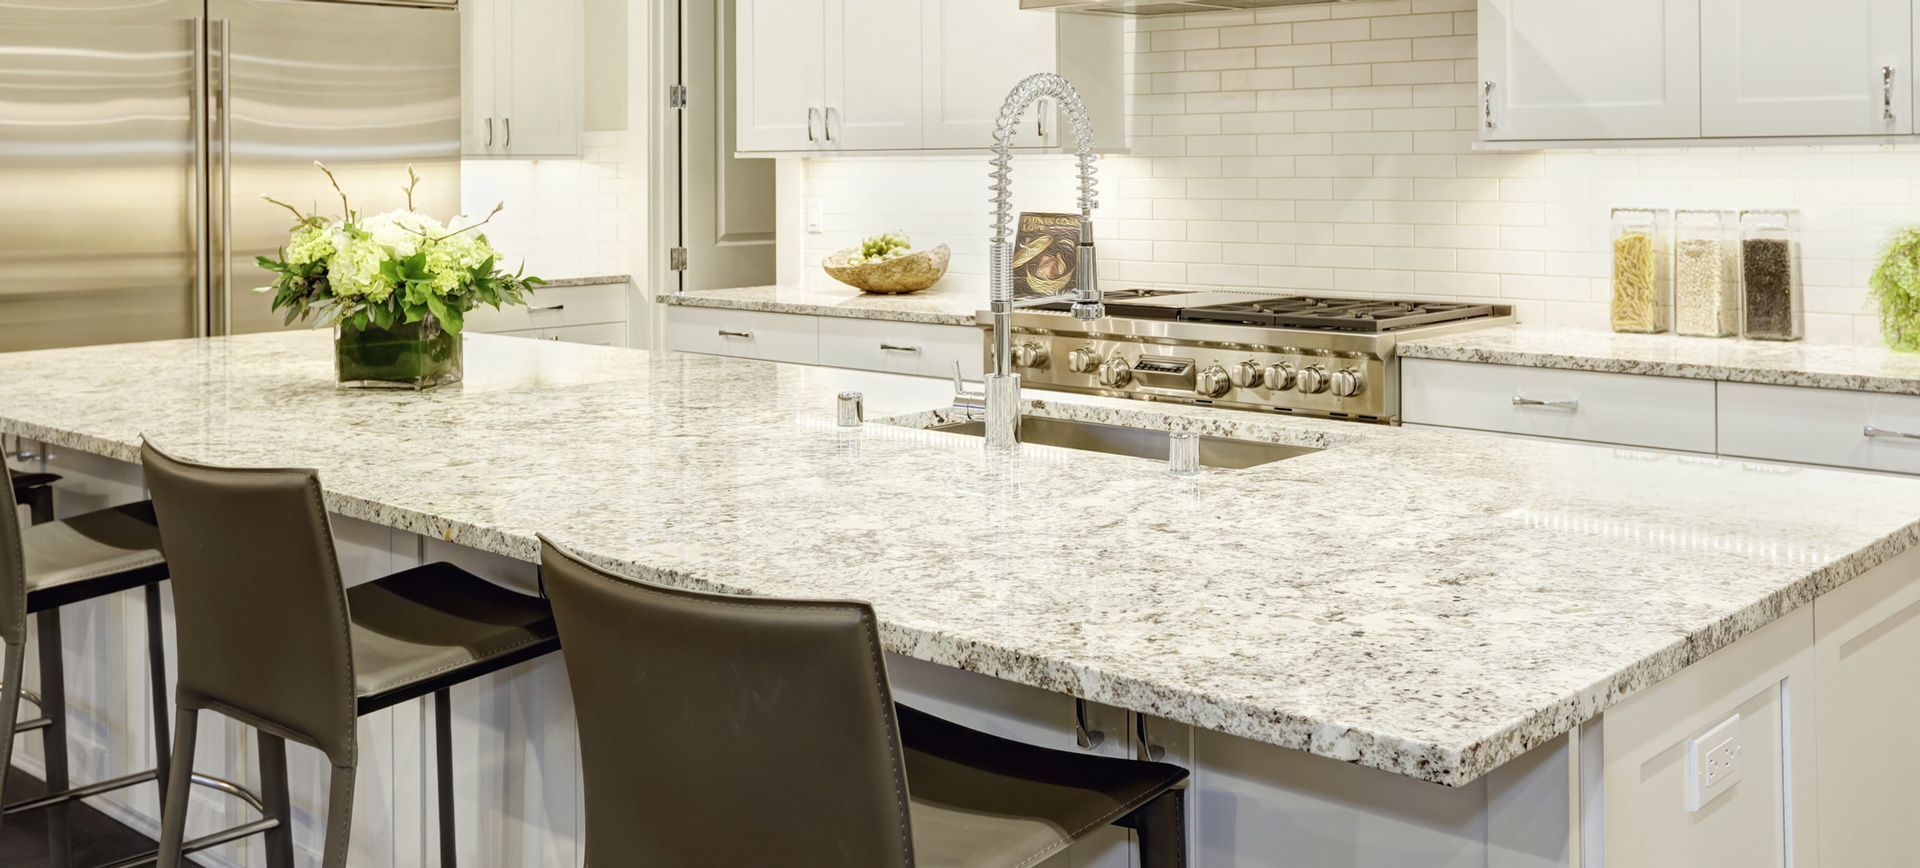 A kitchen with granite counter tops , stainless steel appliances , and white cabinets.